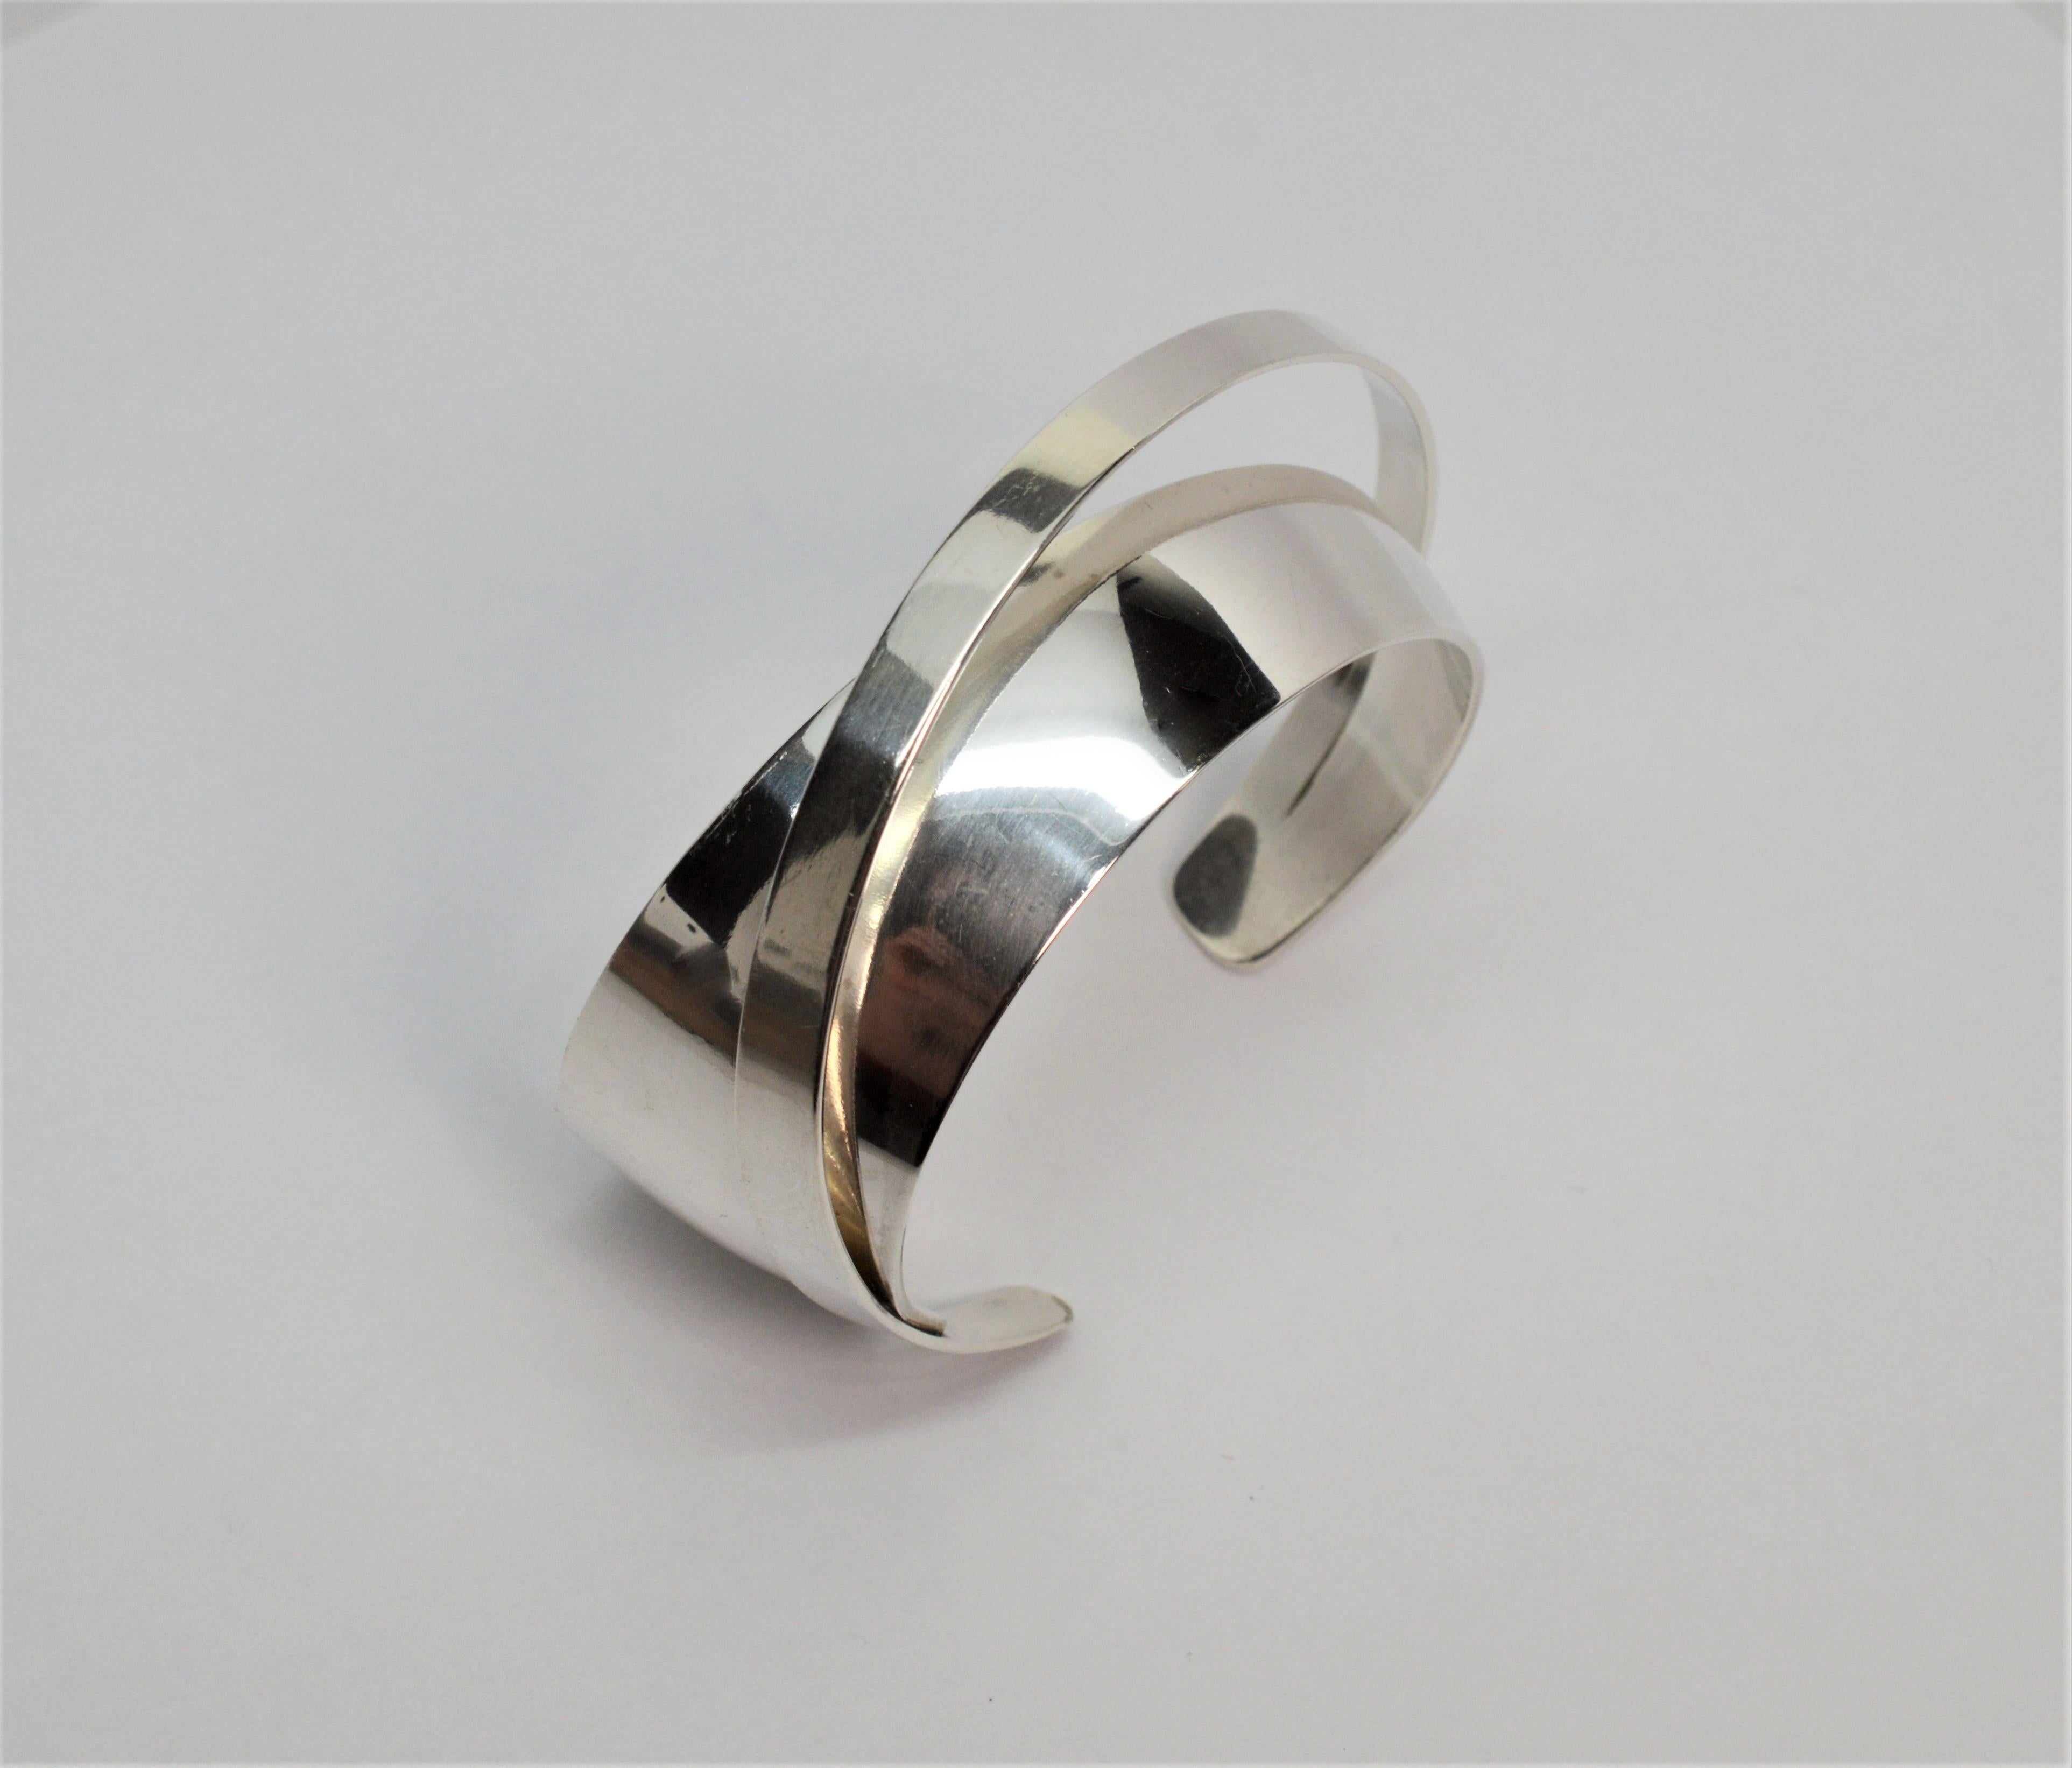 Abstract Sterling Silver Cuff Bracelet 5